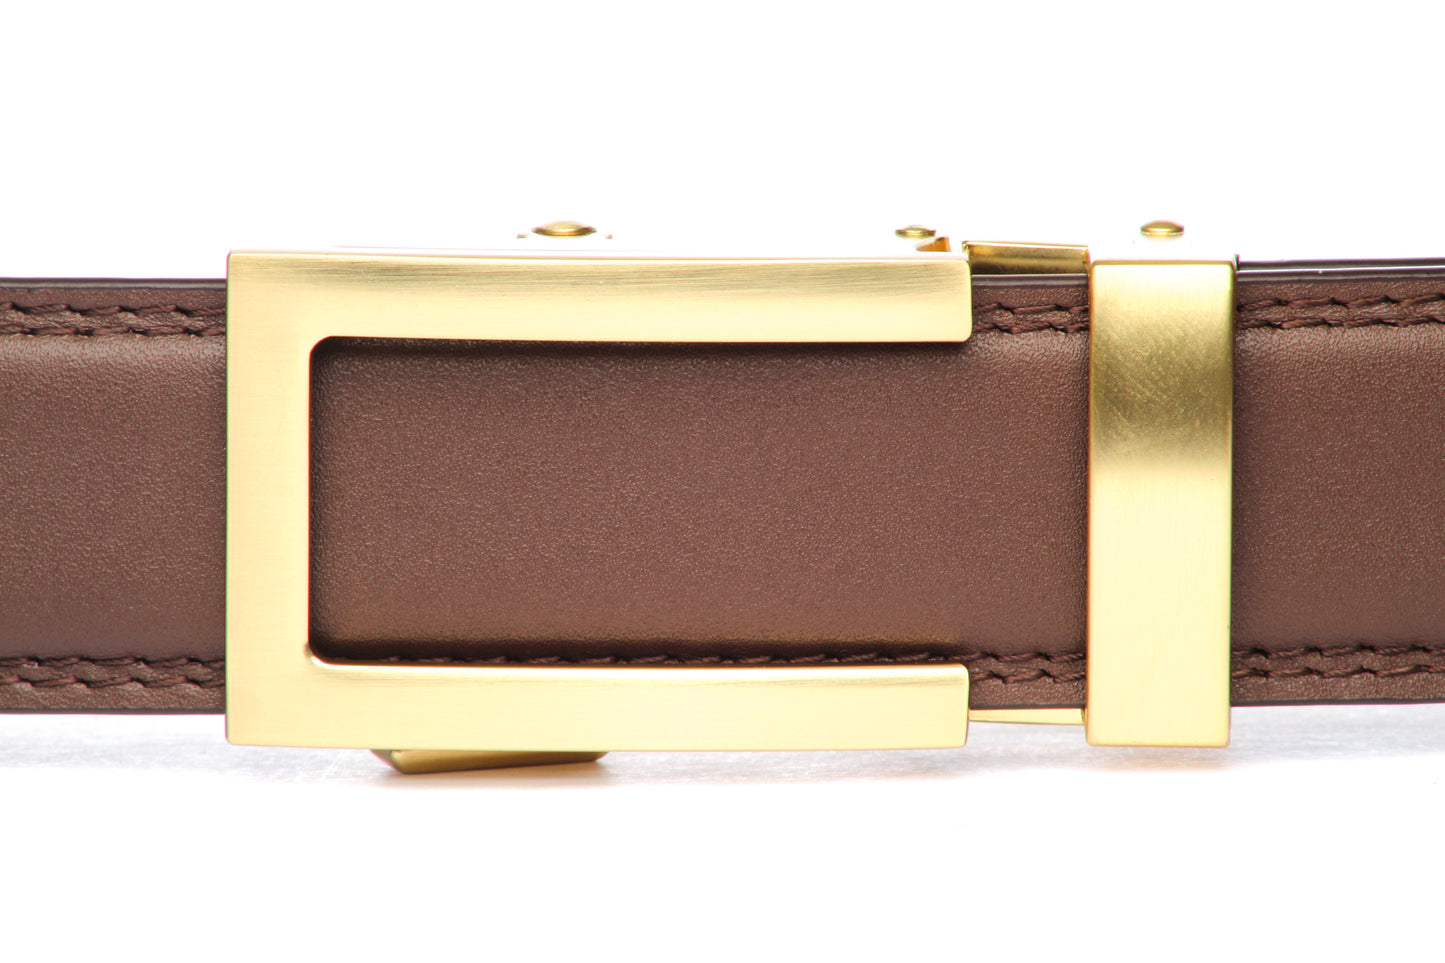 Men's traditional ratchet belt buckle in matte gold with a 1.25-inch width, front view.